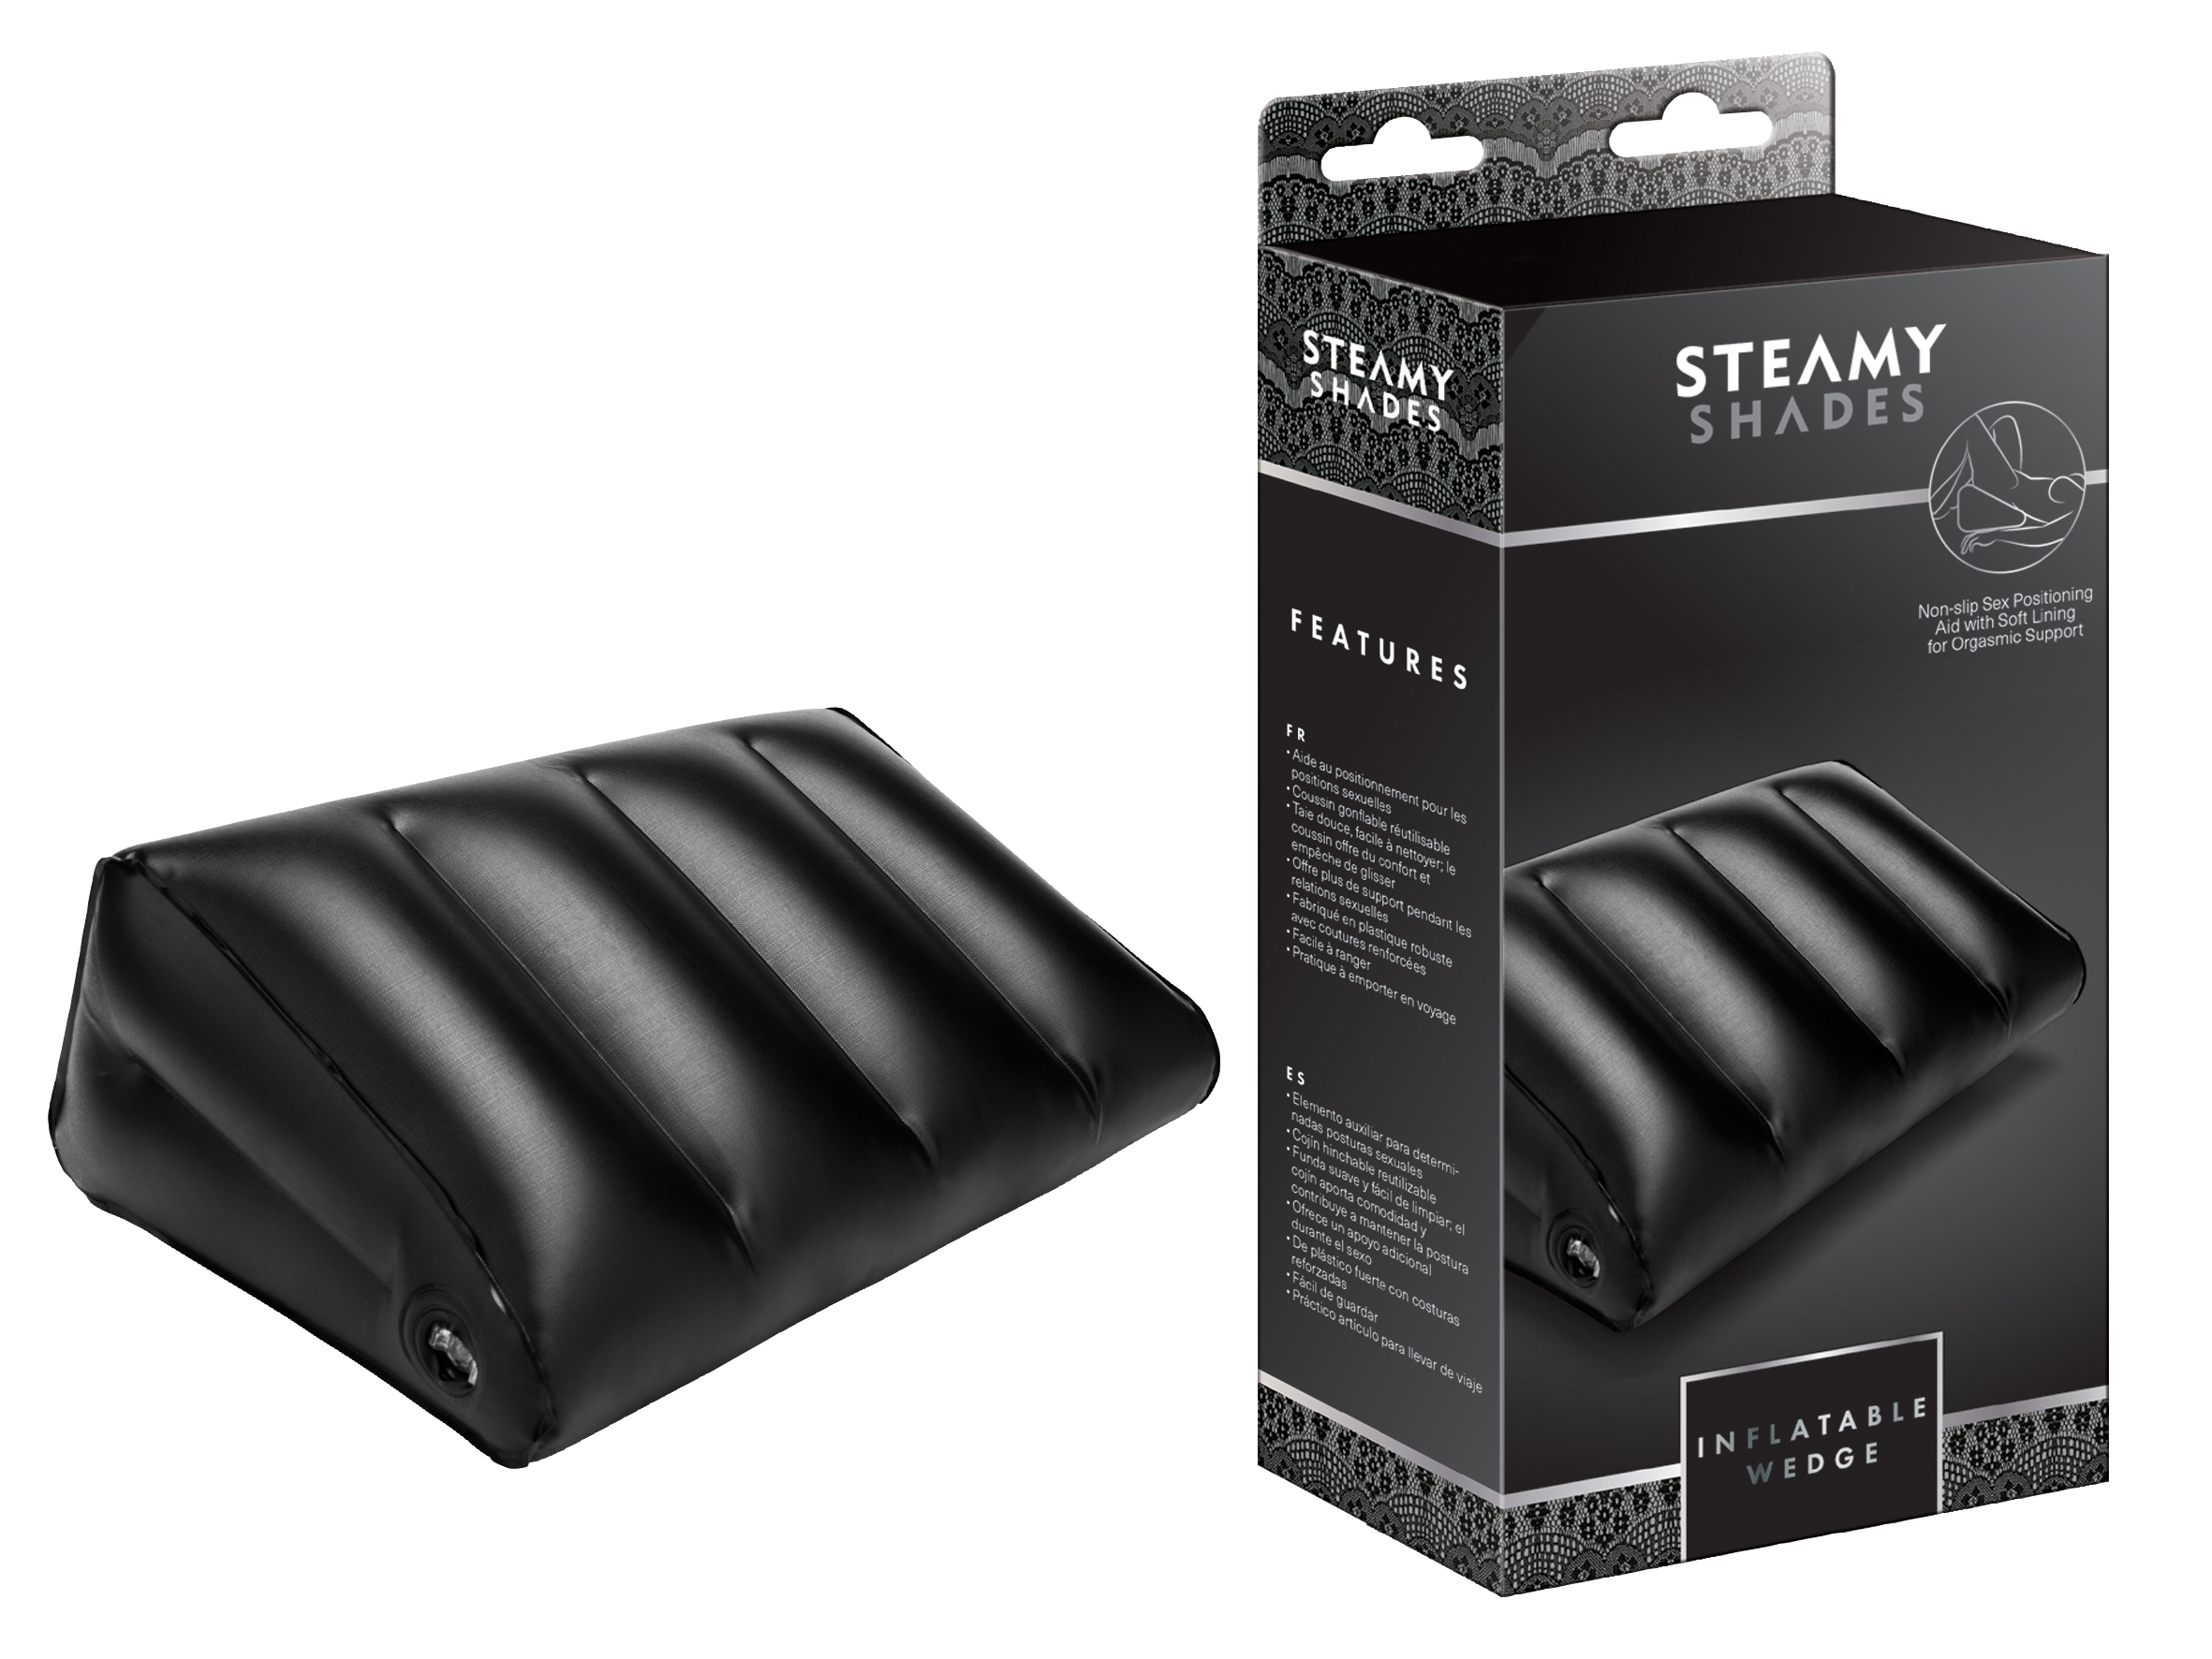 STEAMY SHADES Inflatable Wedge